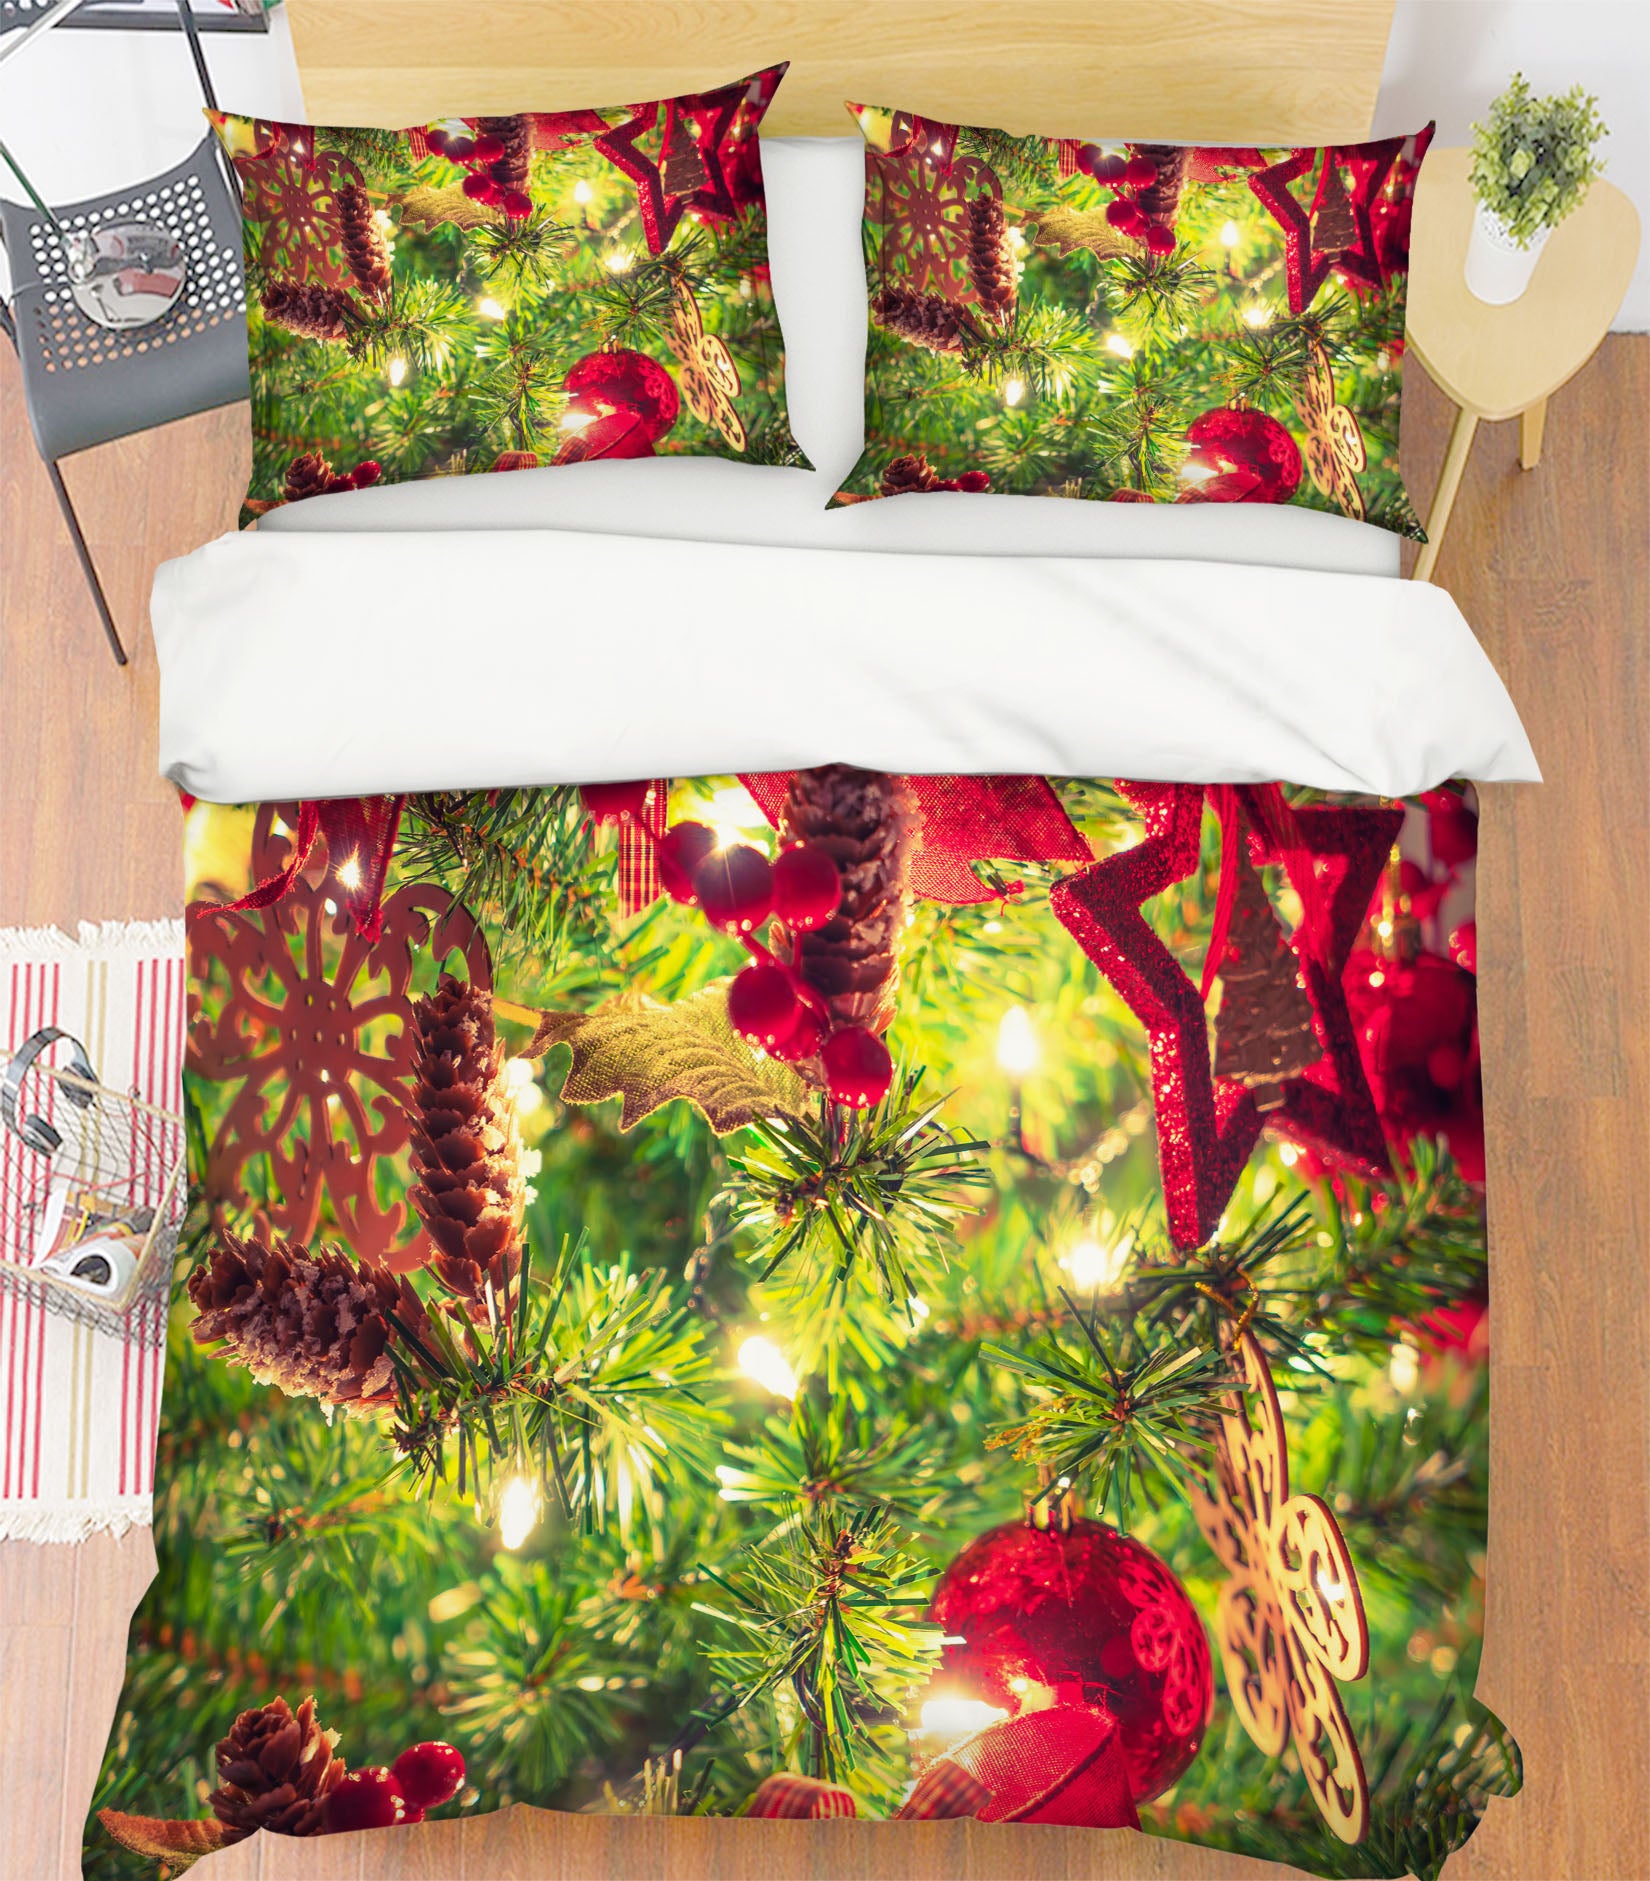 3D Branches 52210 Christmas Quilt Duvet Cover Xmas Bed Pillowcases